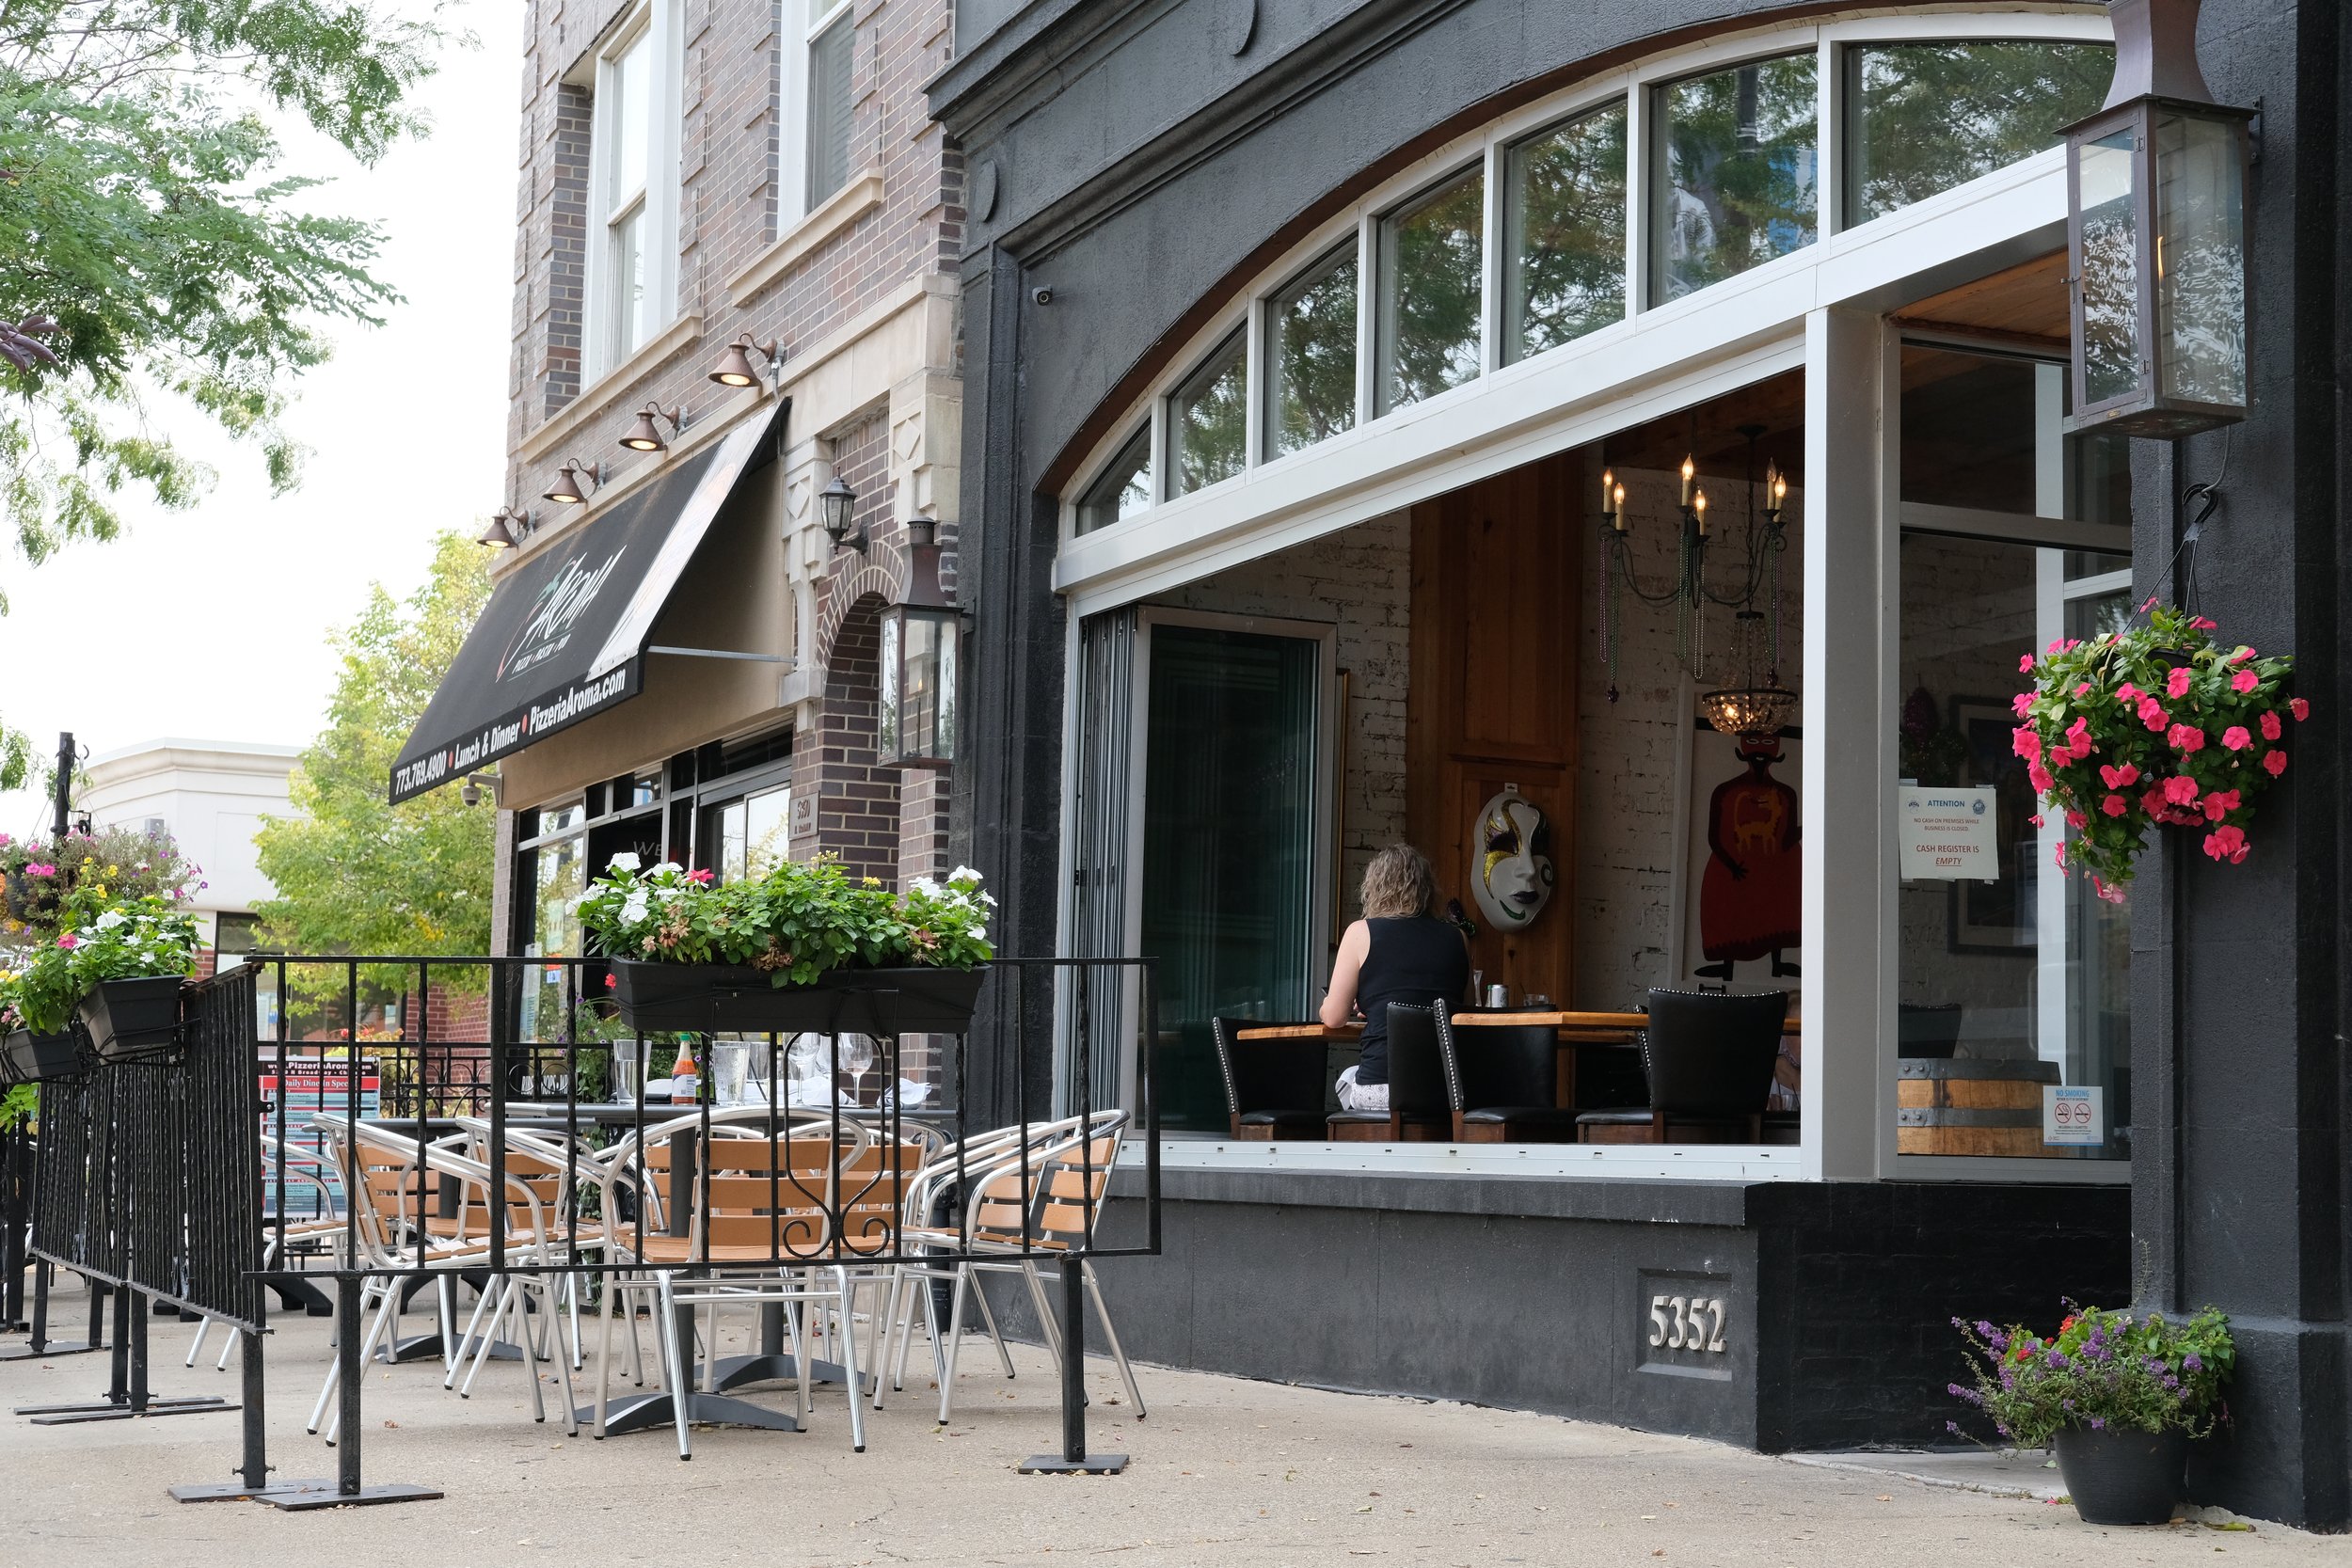 A black storefront restaurant with an open window facing a sidewalk patio.